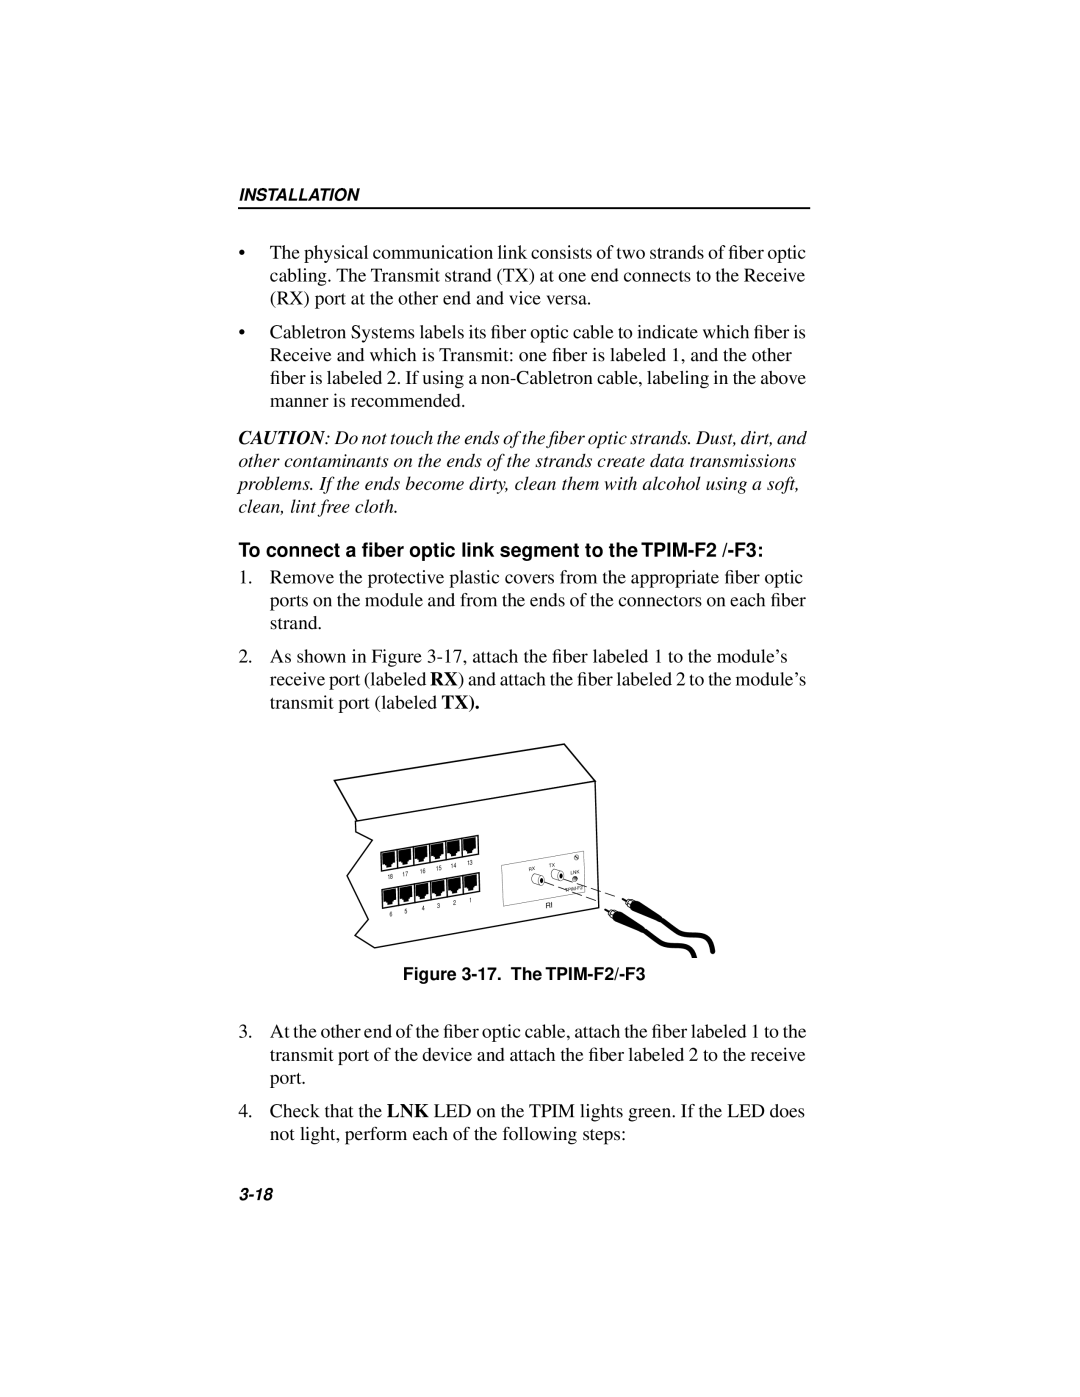 Cabletron Systems 42T, MICROMMAC-22T manual To connect a ﬁber optic link segment to the TPIM-F2 /-F3, 17. The TPIM-F2/-F3 